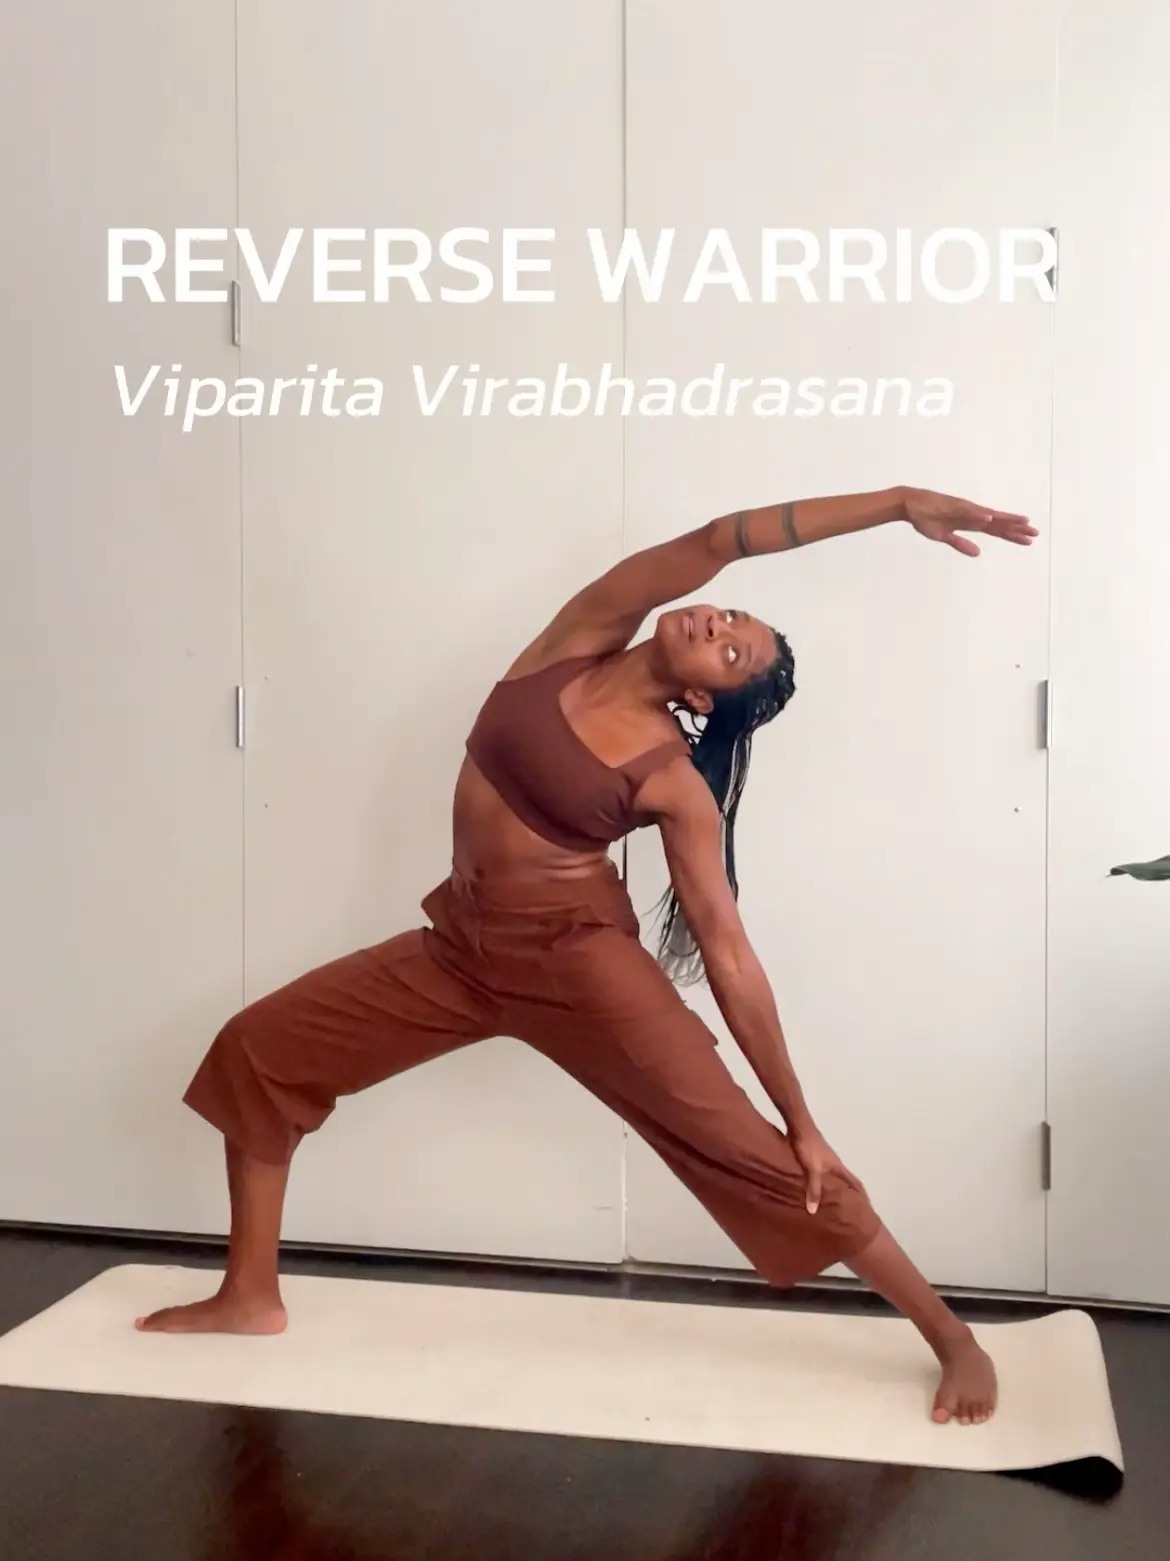 Yoga for Beginners: The WARRIORS, Gallery posted by Imani Nicole